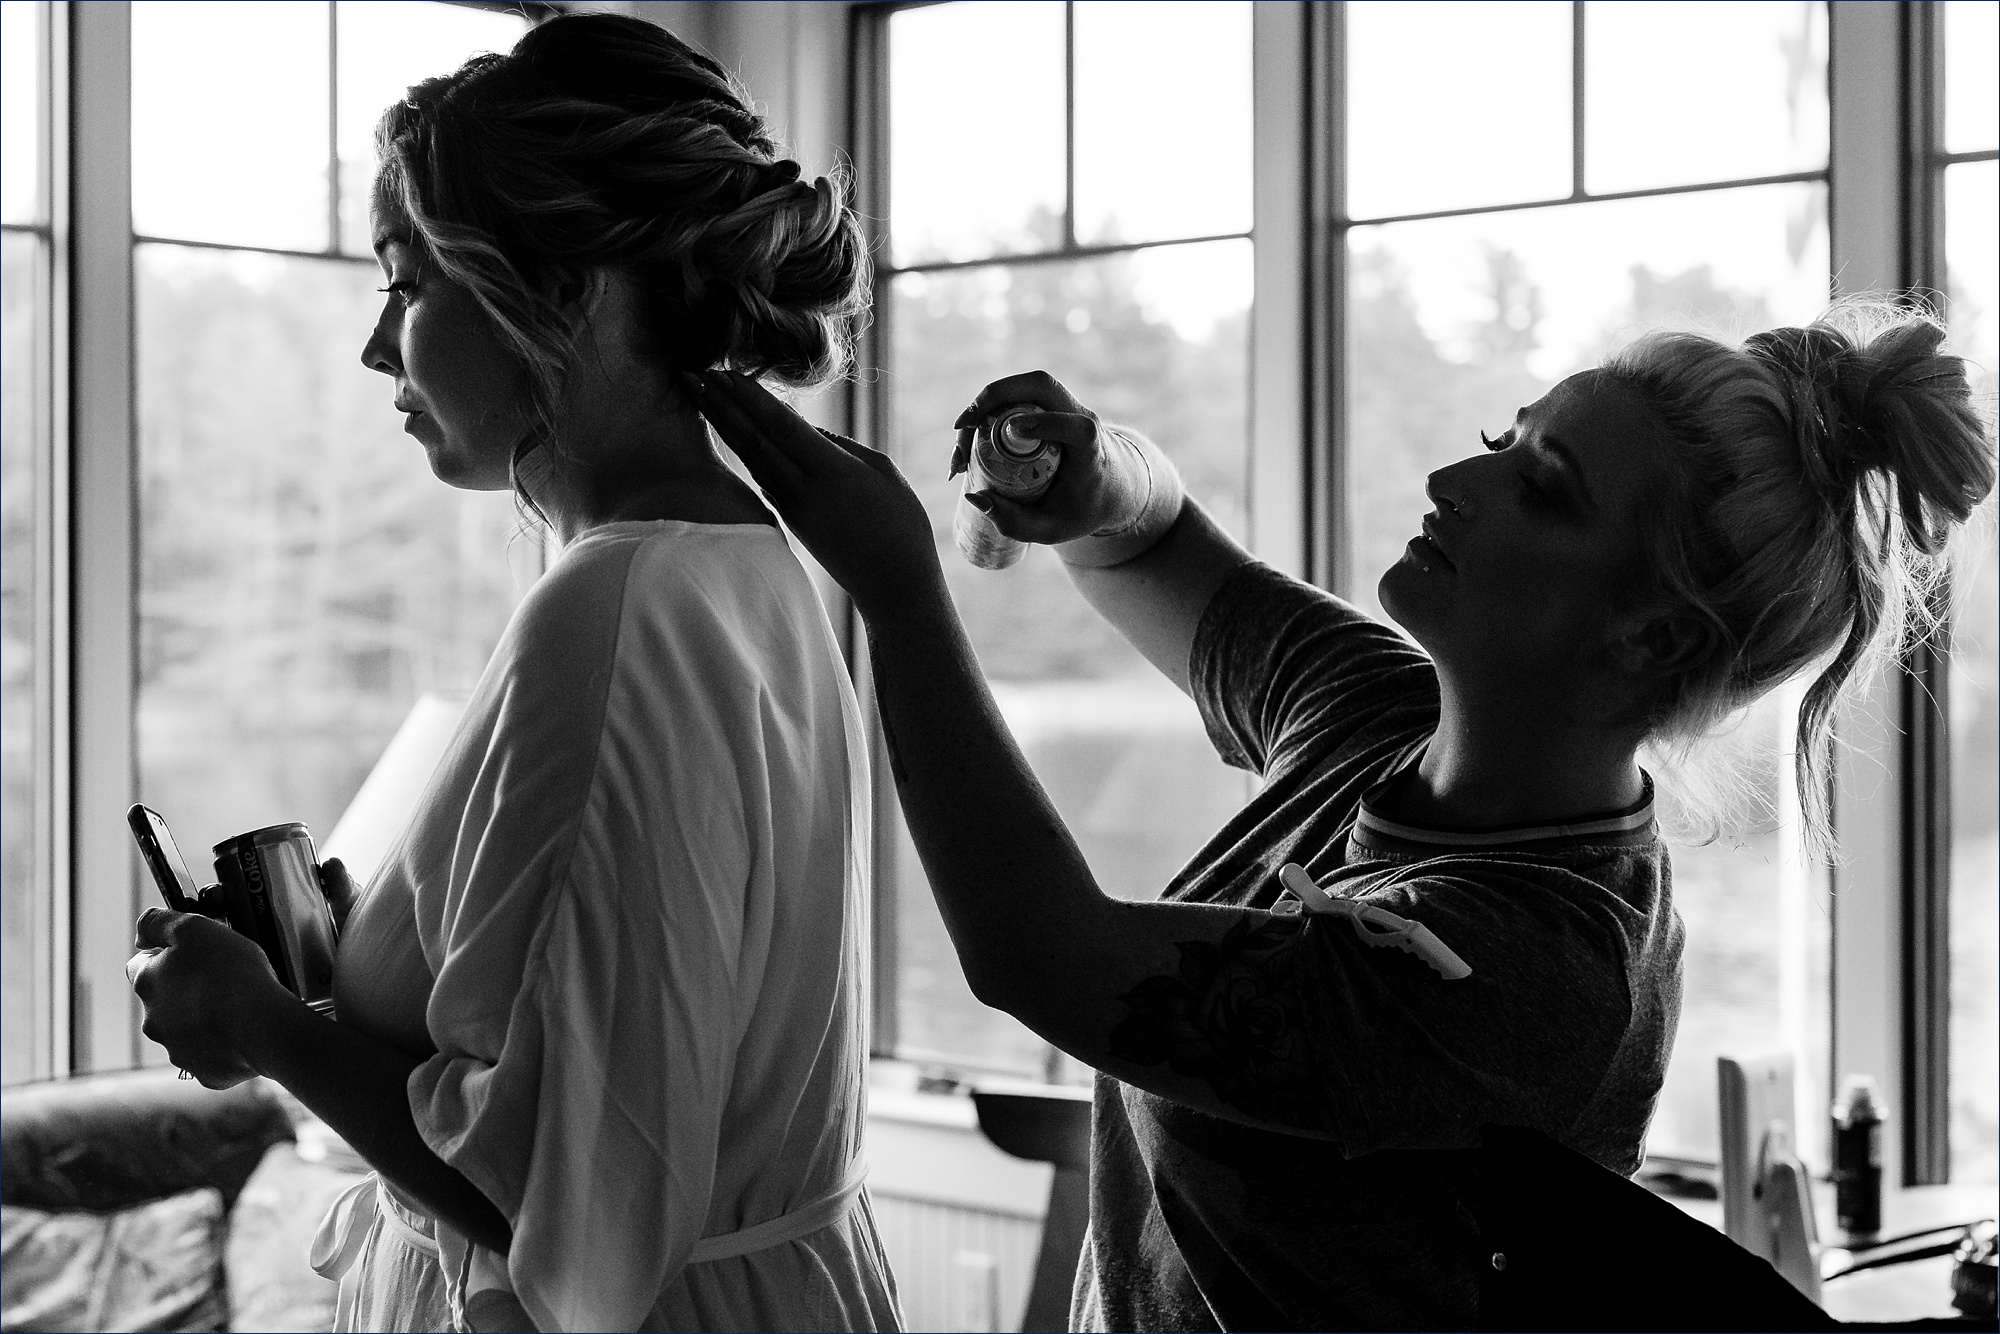 Finishing touches on the bride's hair before she puts on her gown